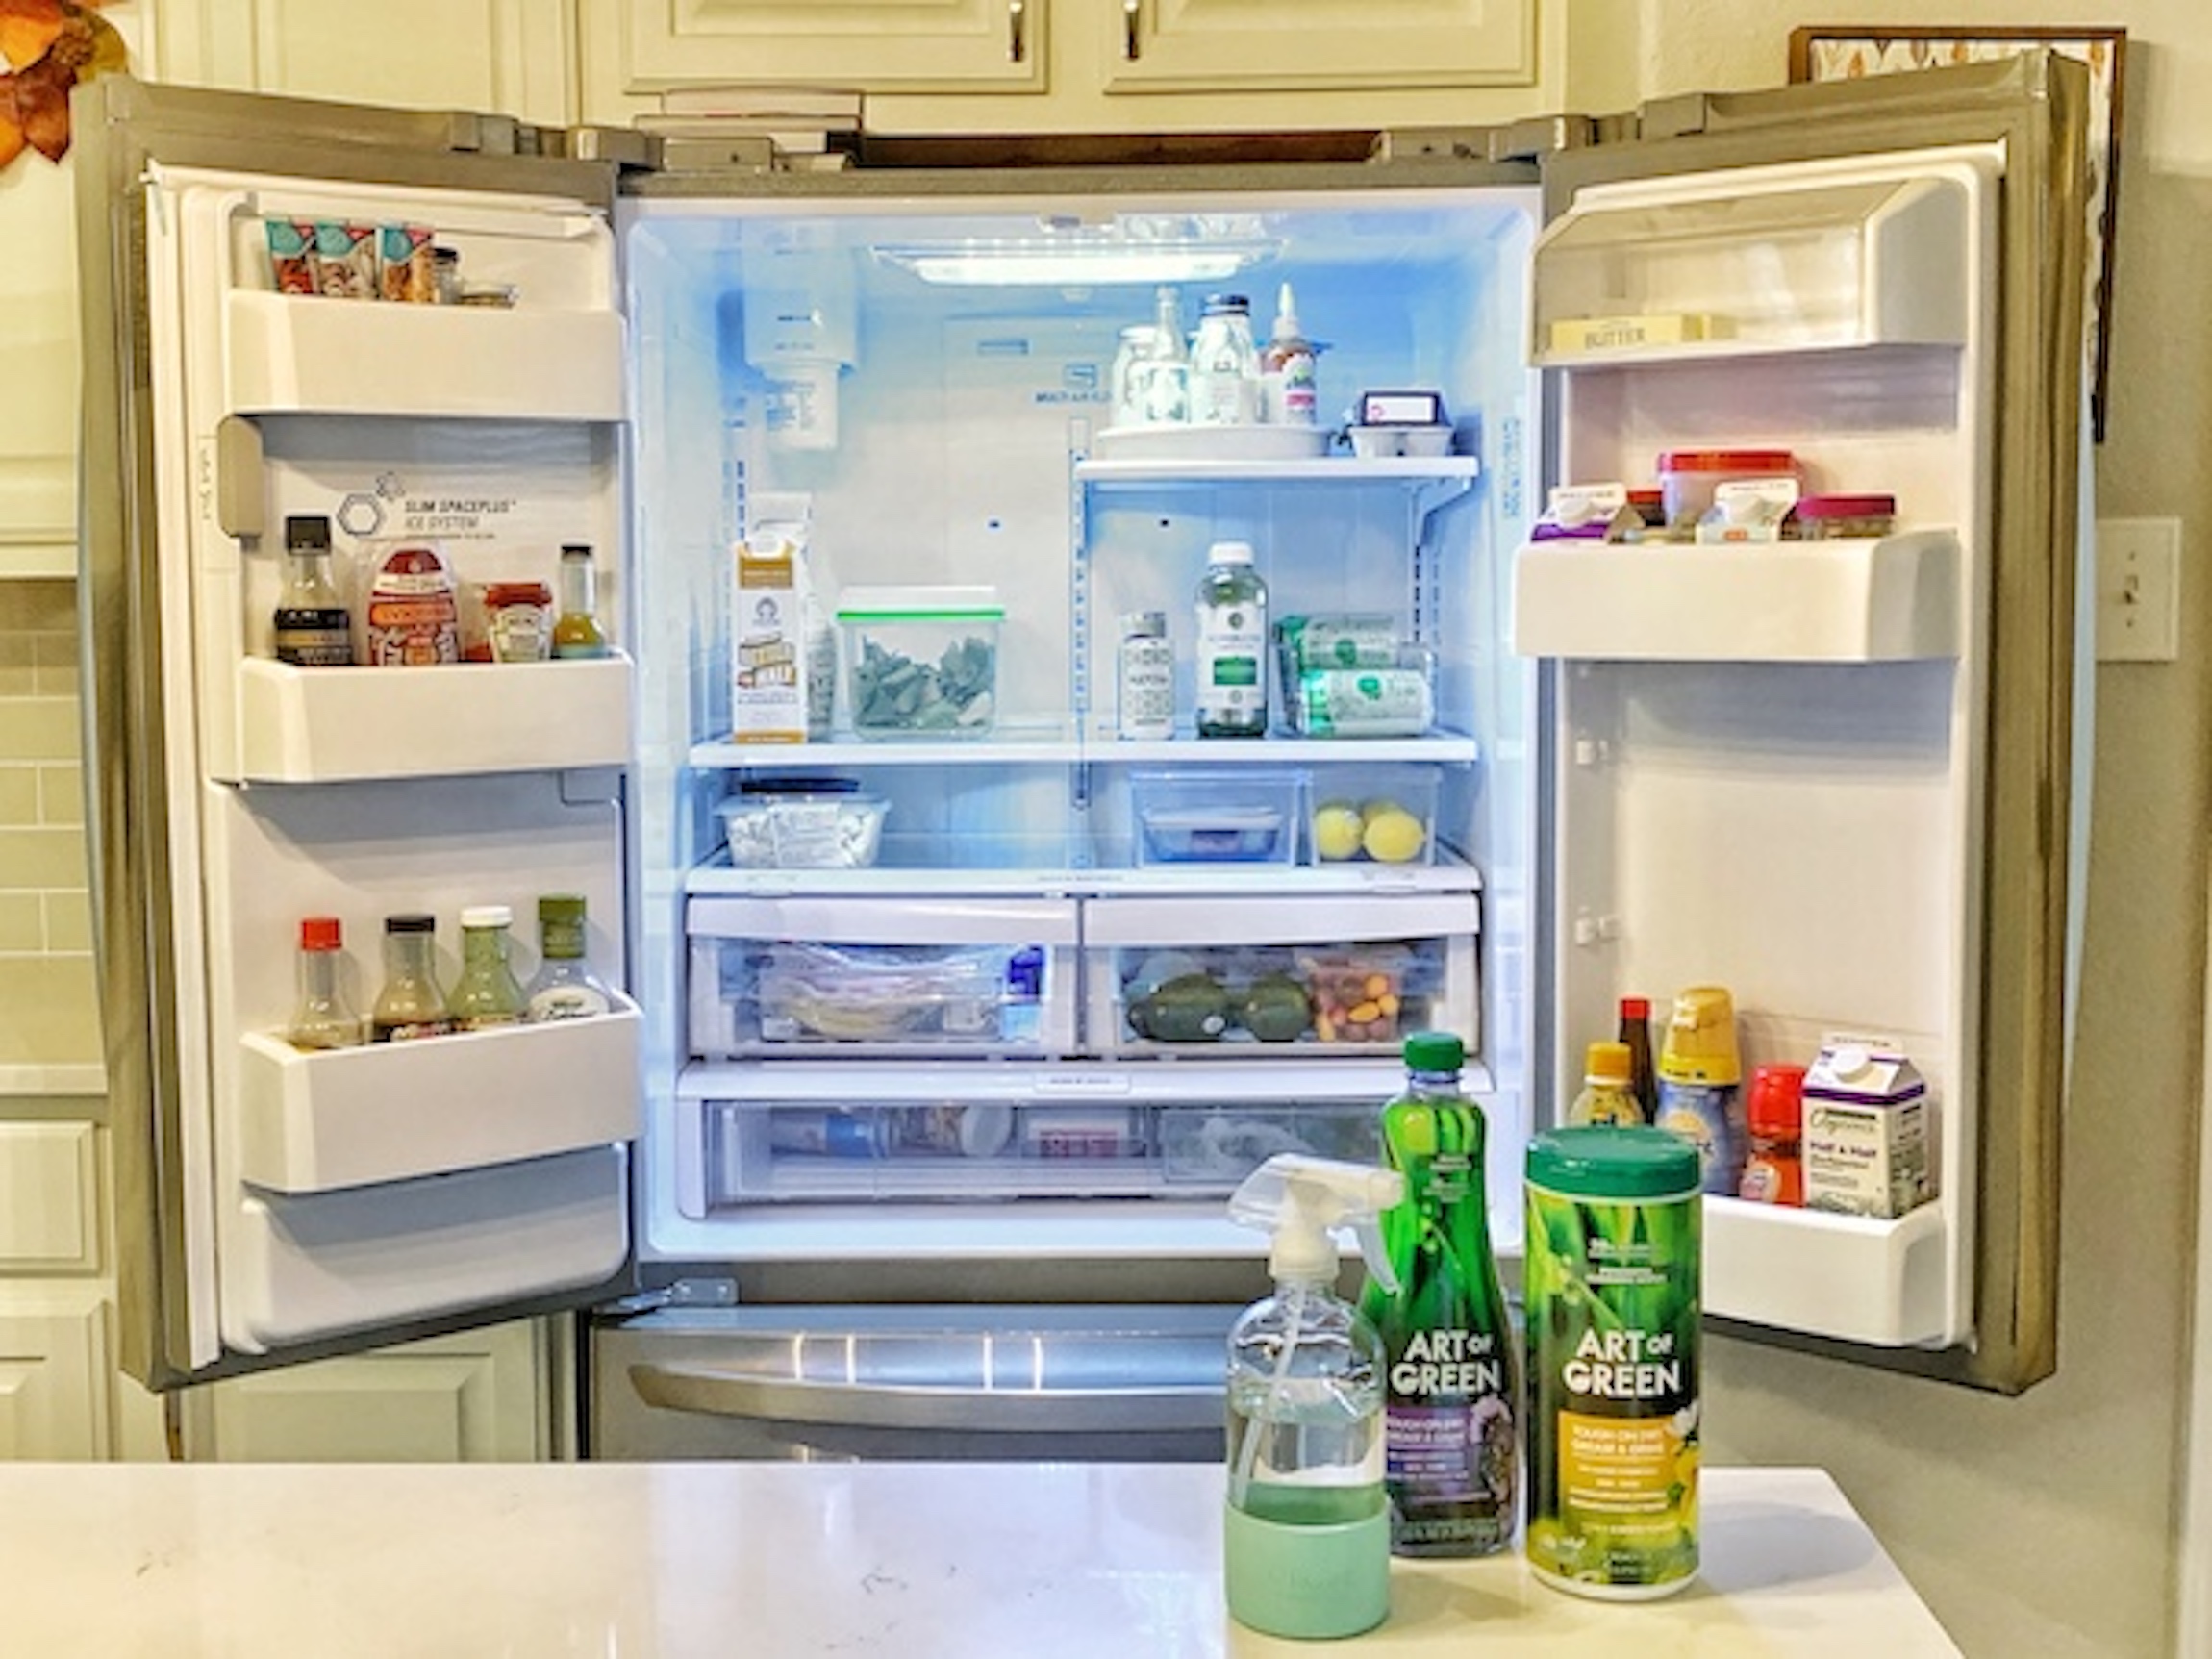 Clean Your Refrigerator Day: top tips for a clean, hygienic fridge